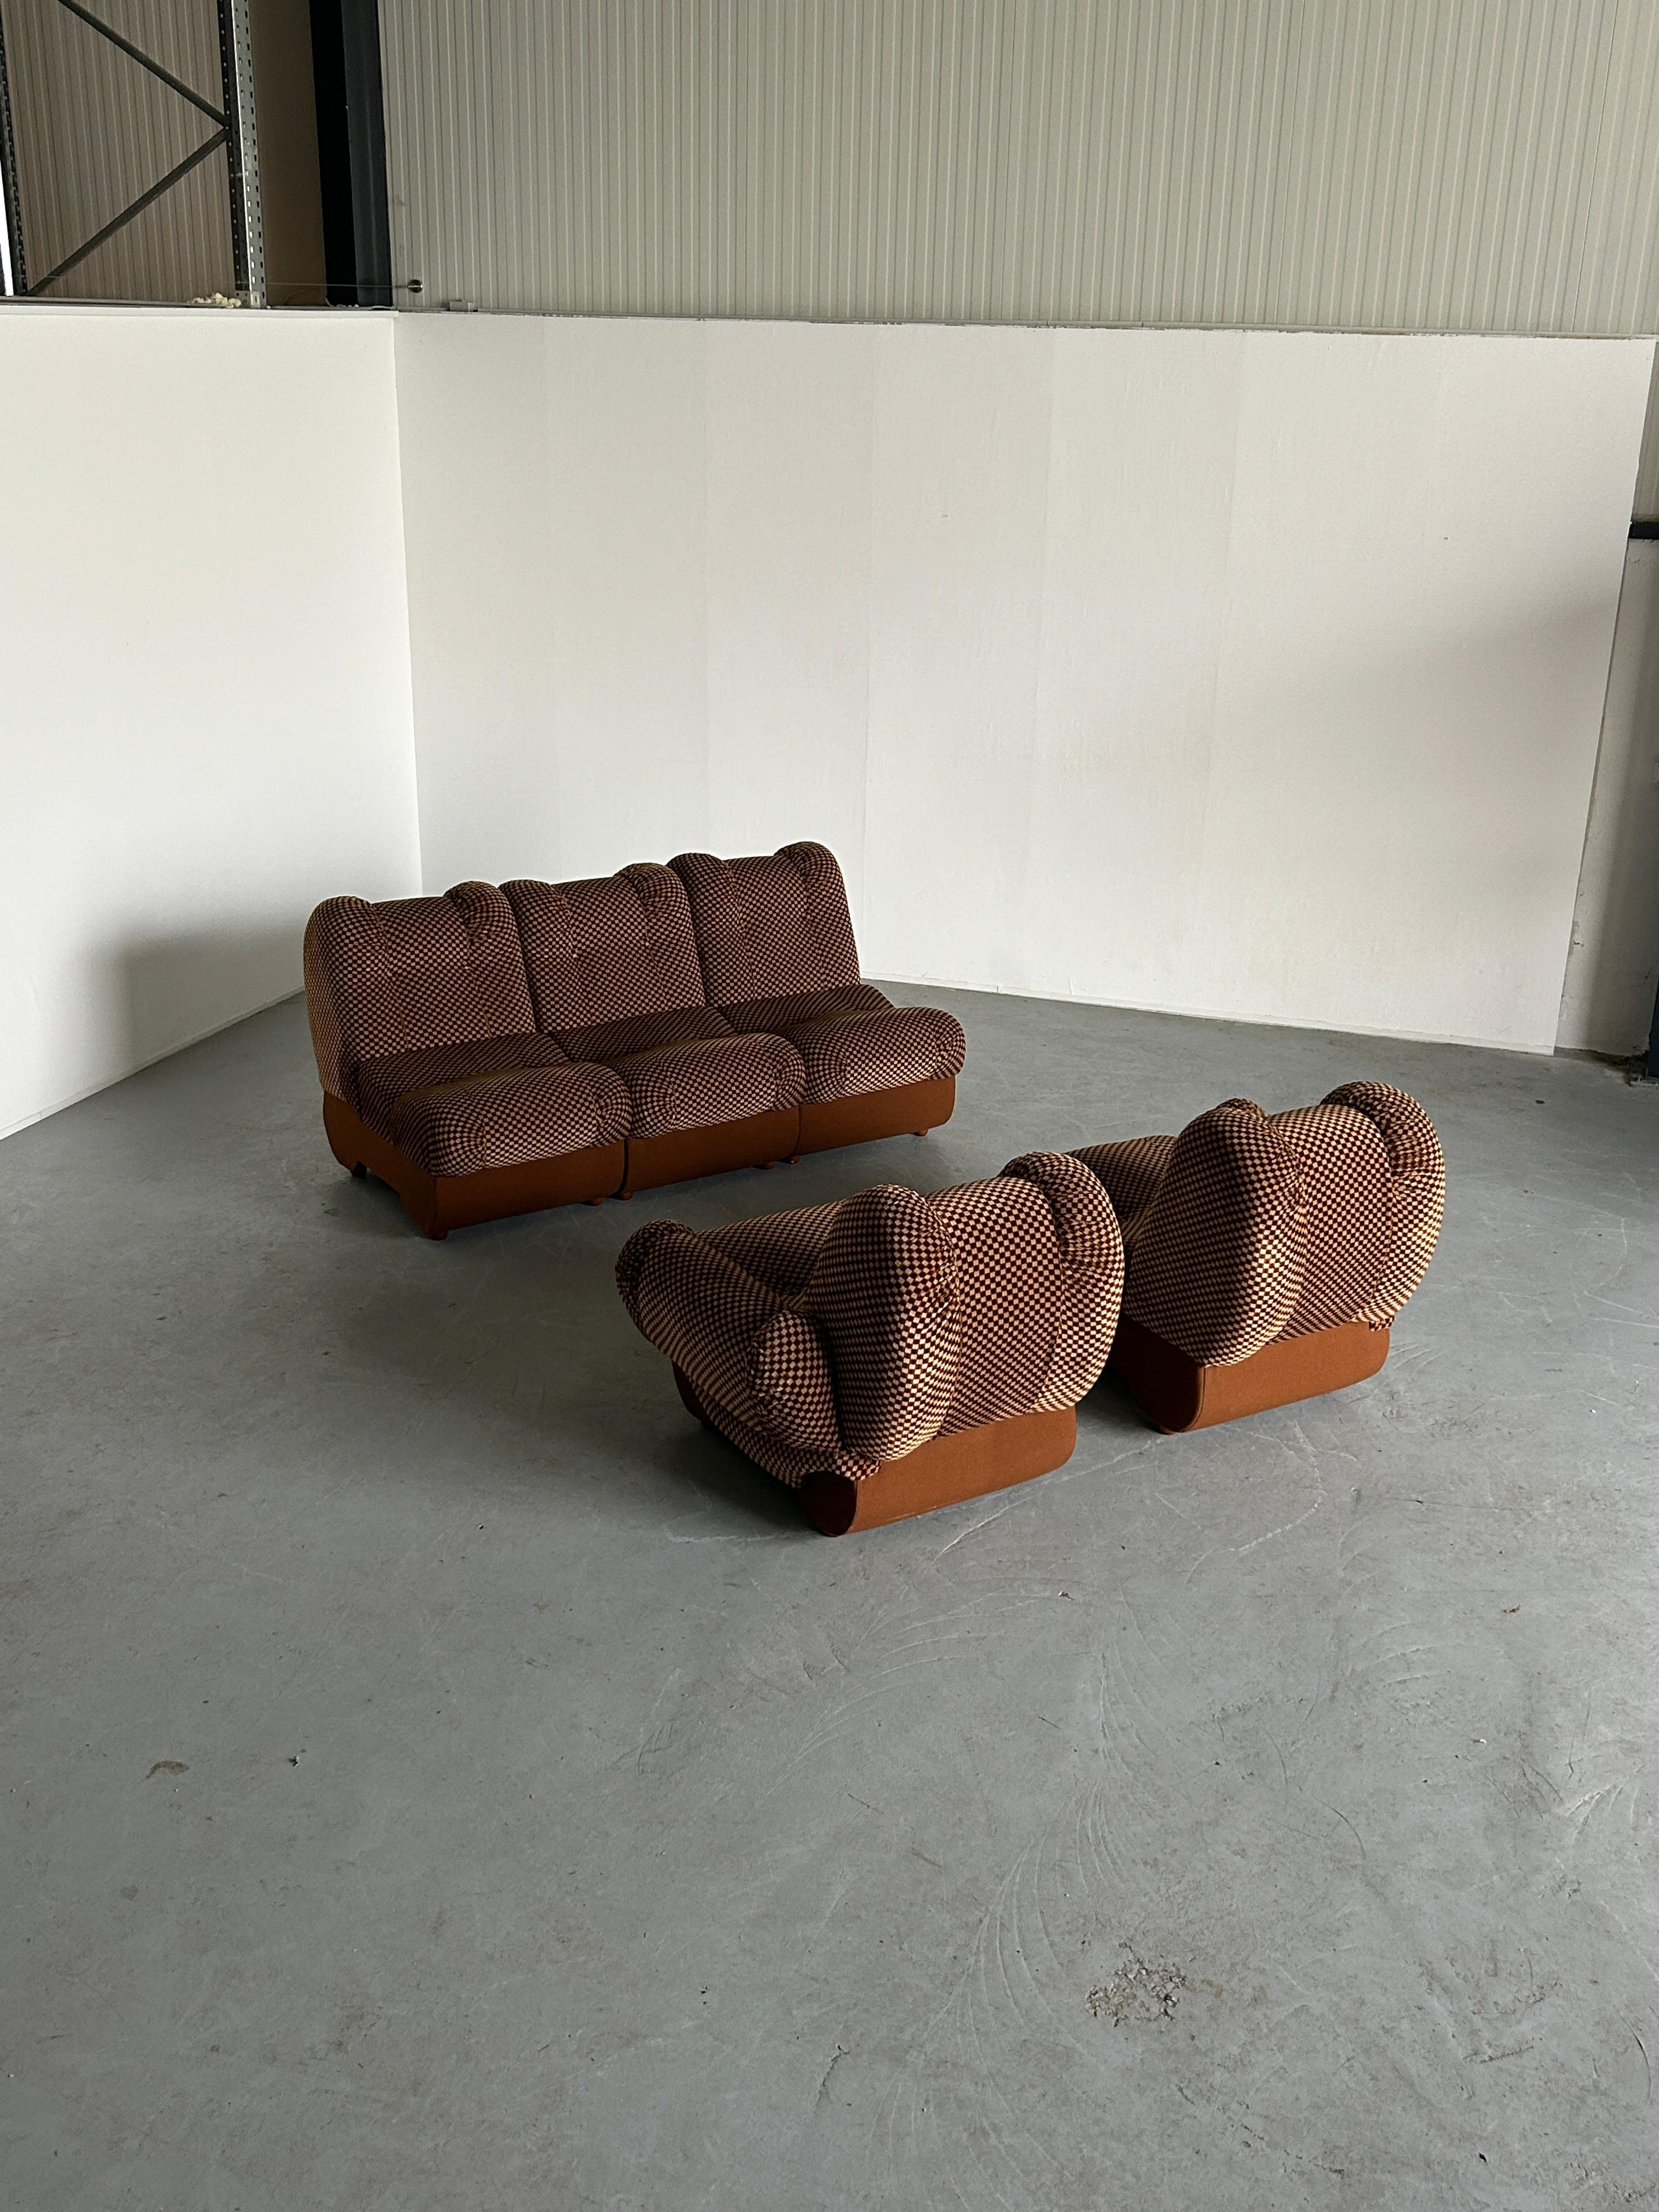 Metal Large Space Age Cloud Modular Sofa Set in Brown Striped Fabric, Italy 1960s For Sale